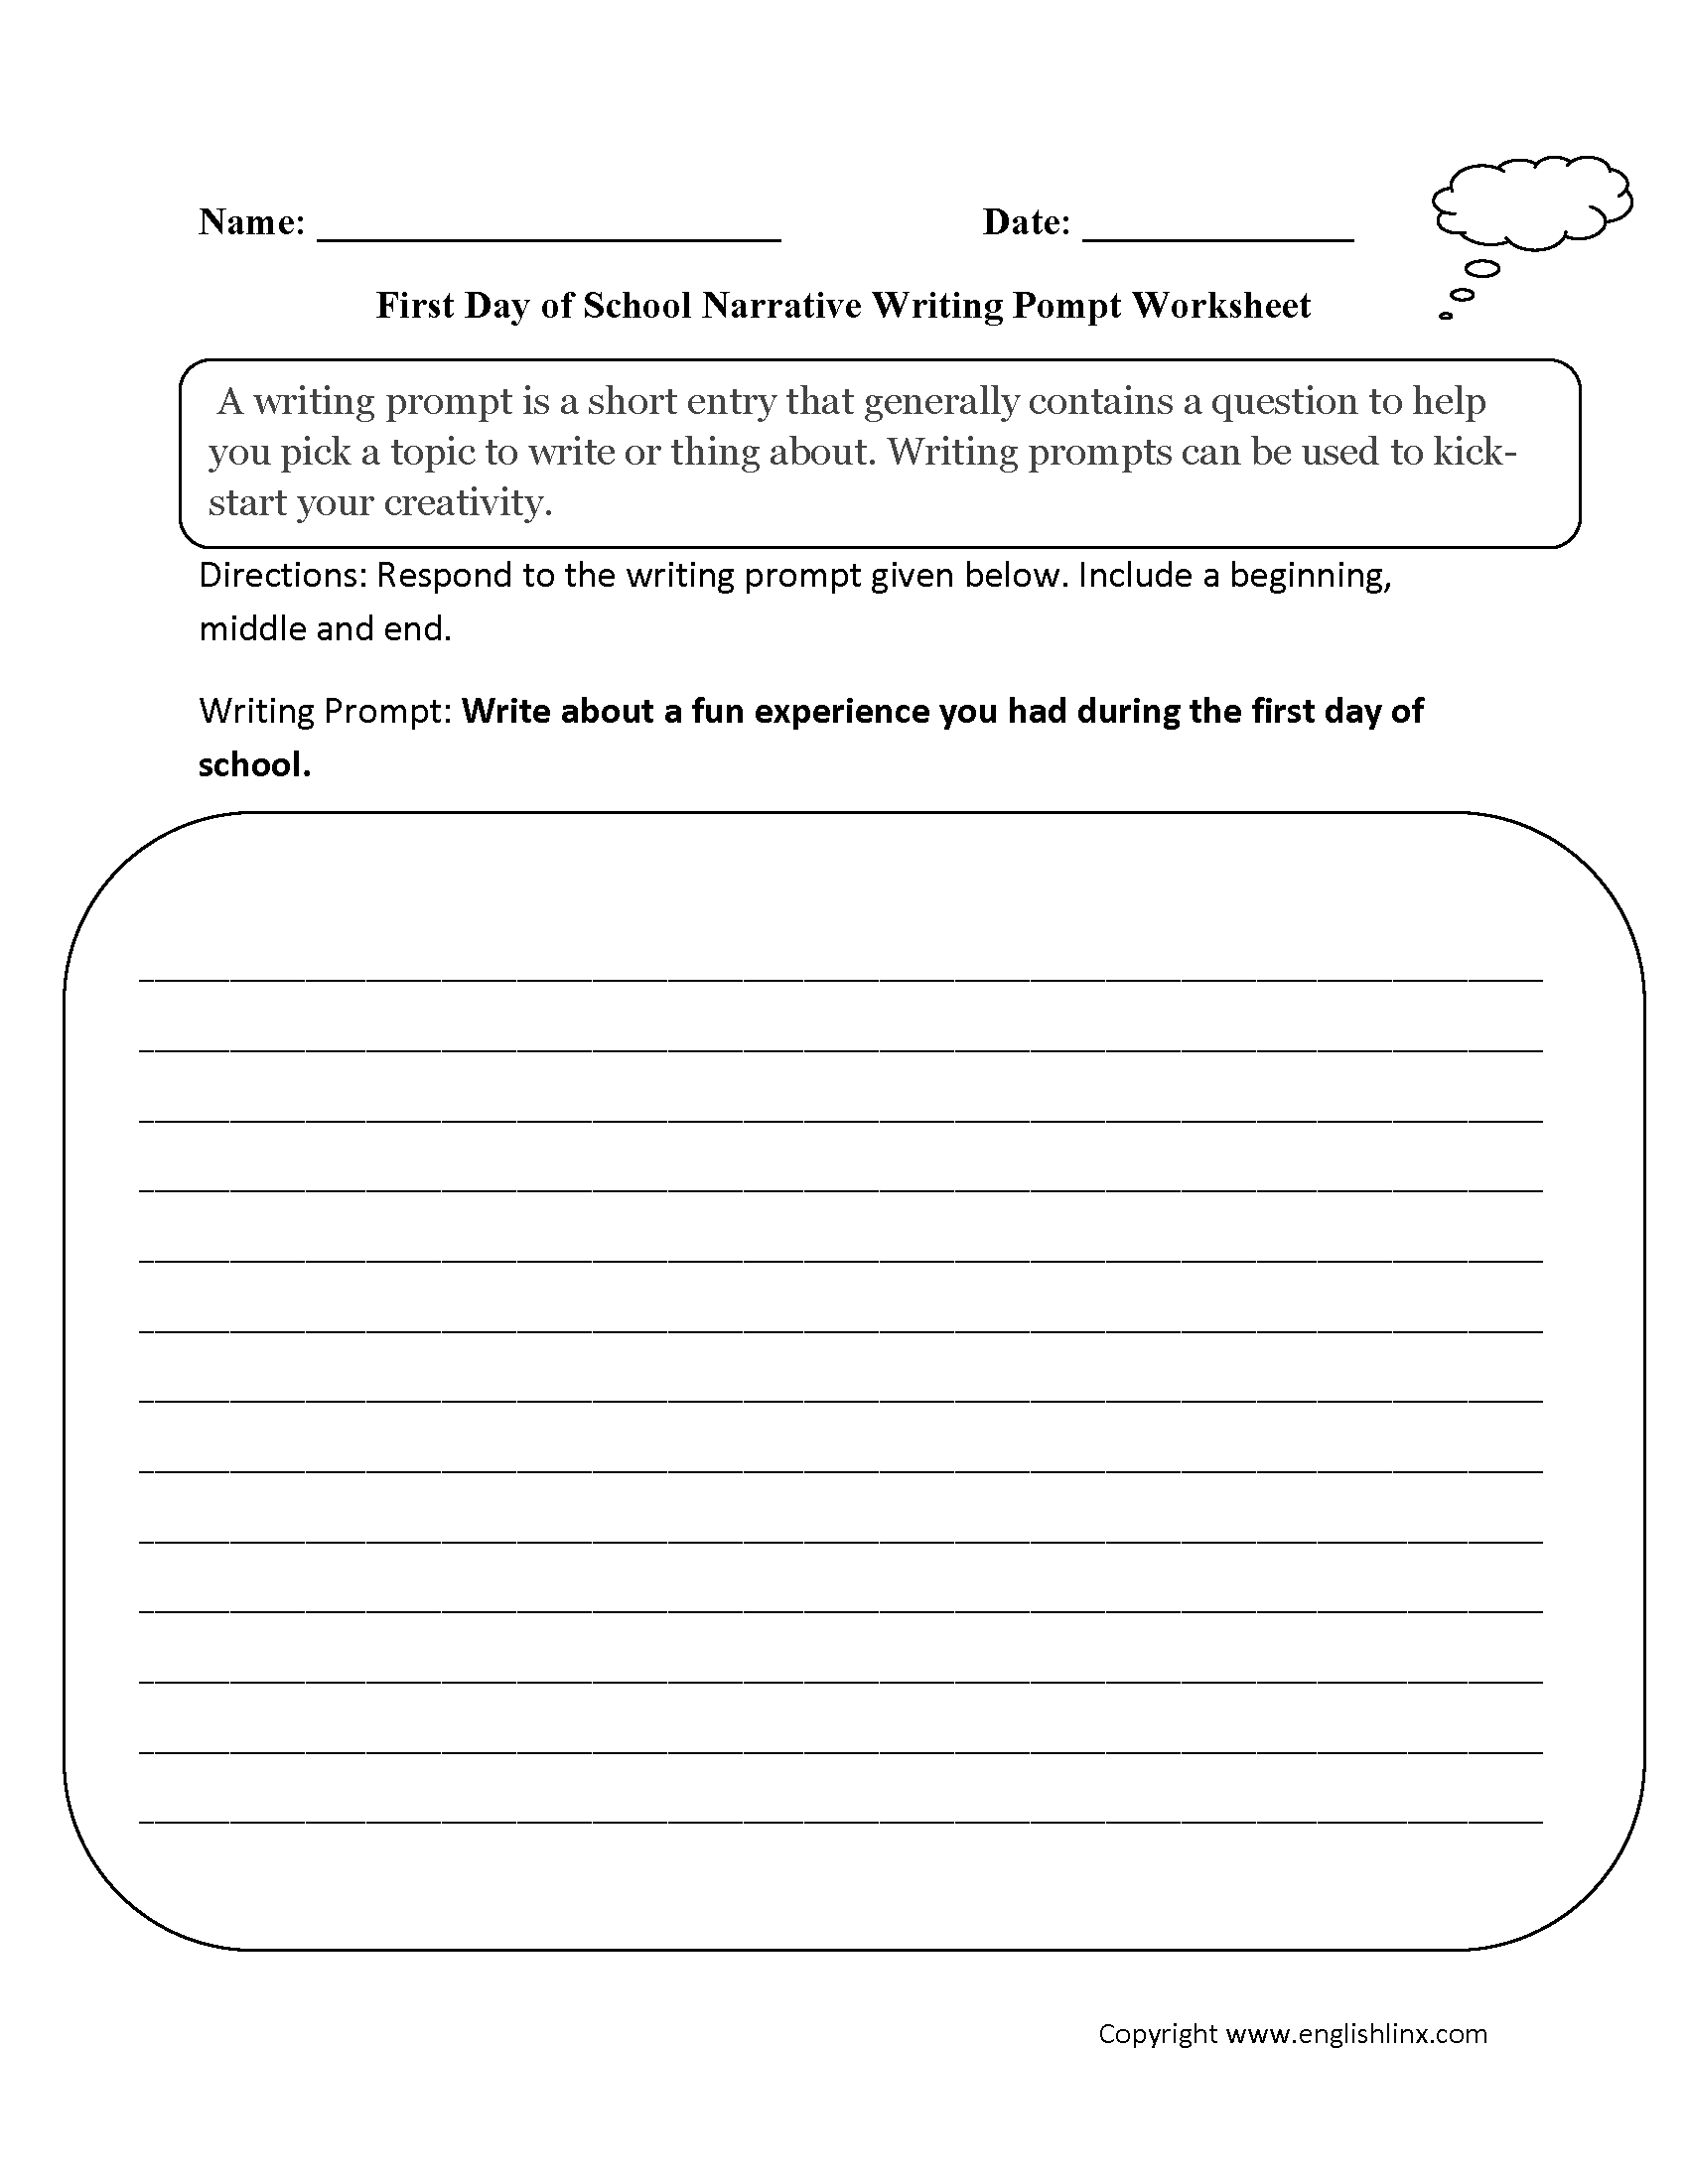 write a descriptive essay about your first day at primary school